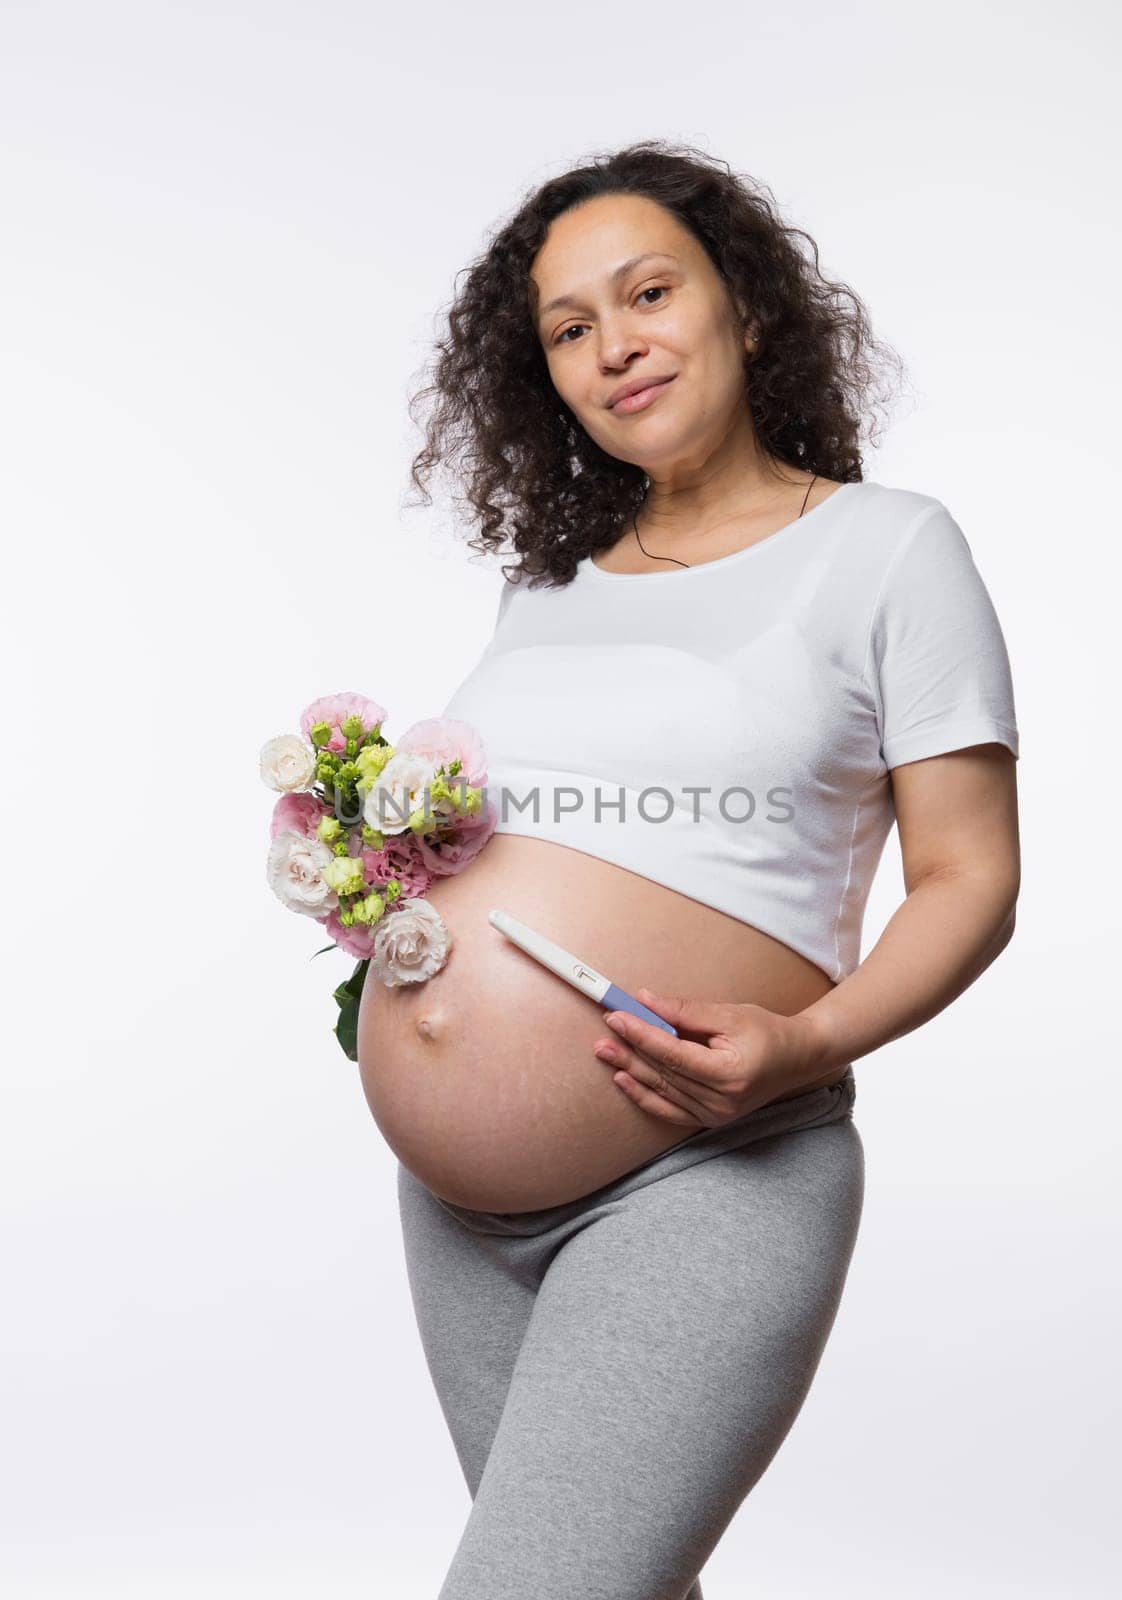 Expecting baby. Childbearing. Childbirth Maternity concept. Pregnant woman holding pregnancy test and bouquet of flowers by artgf